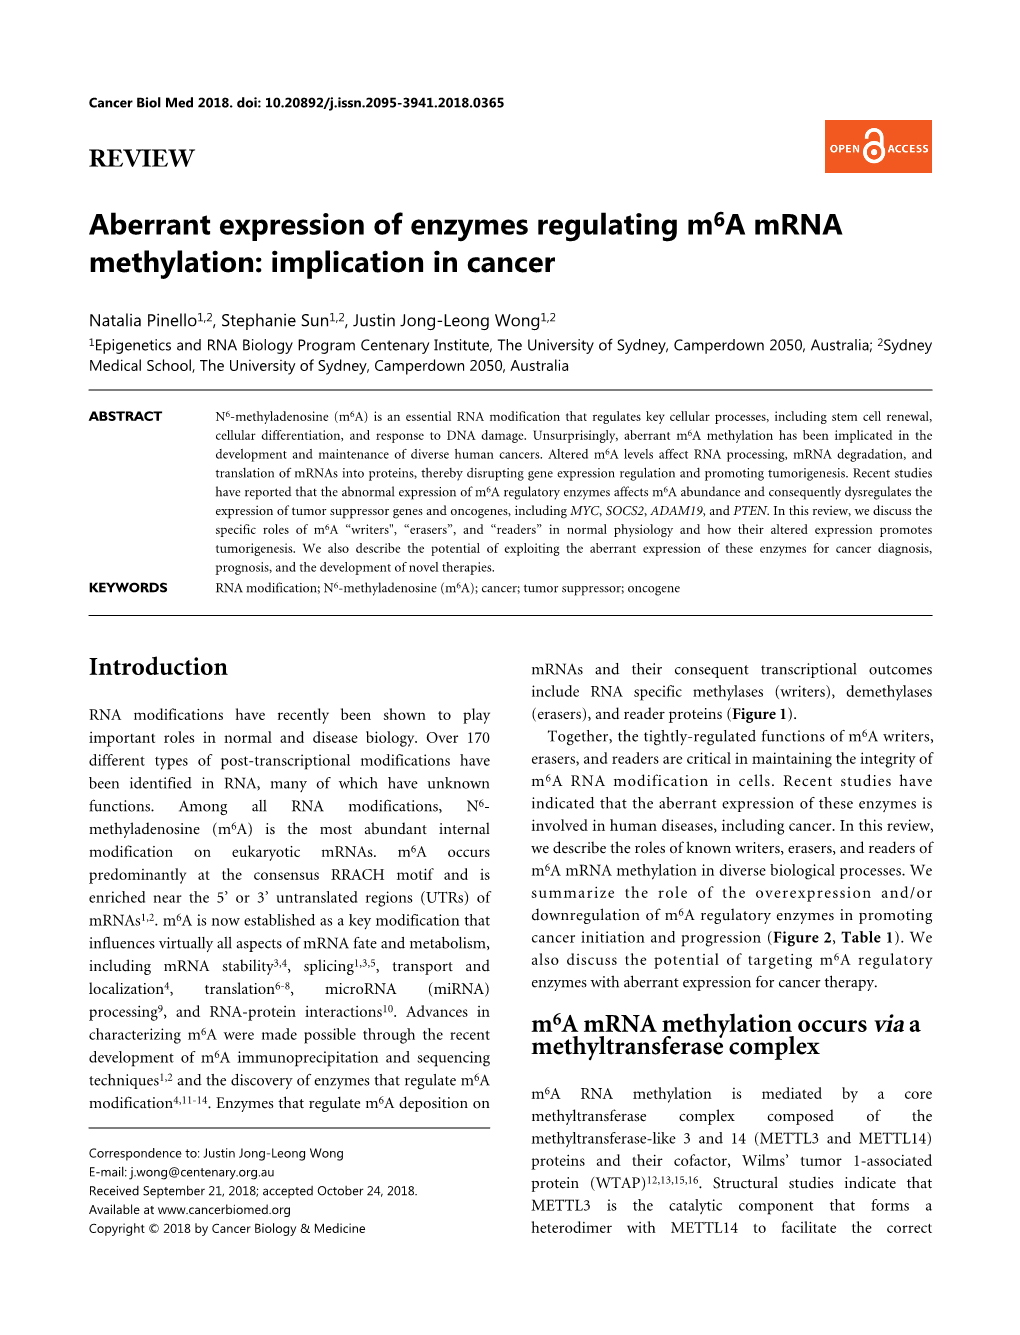 Aberrant Expression of Enzymes Regulating M6a Mrna Methylation: Implication in Cancer